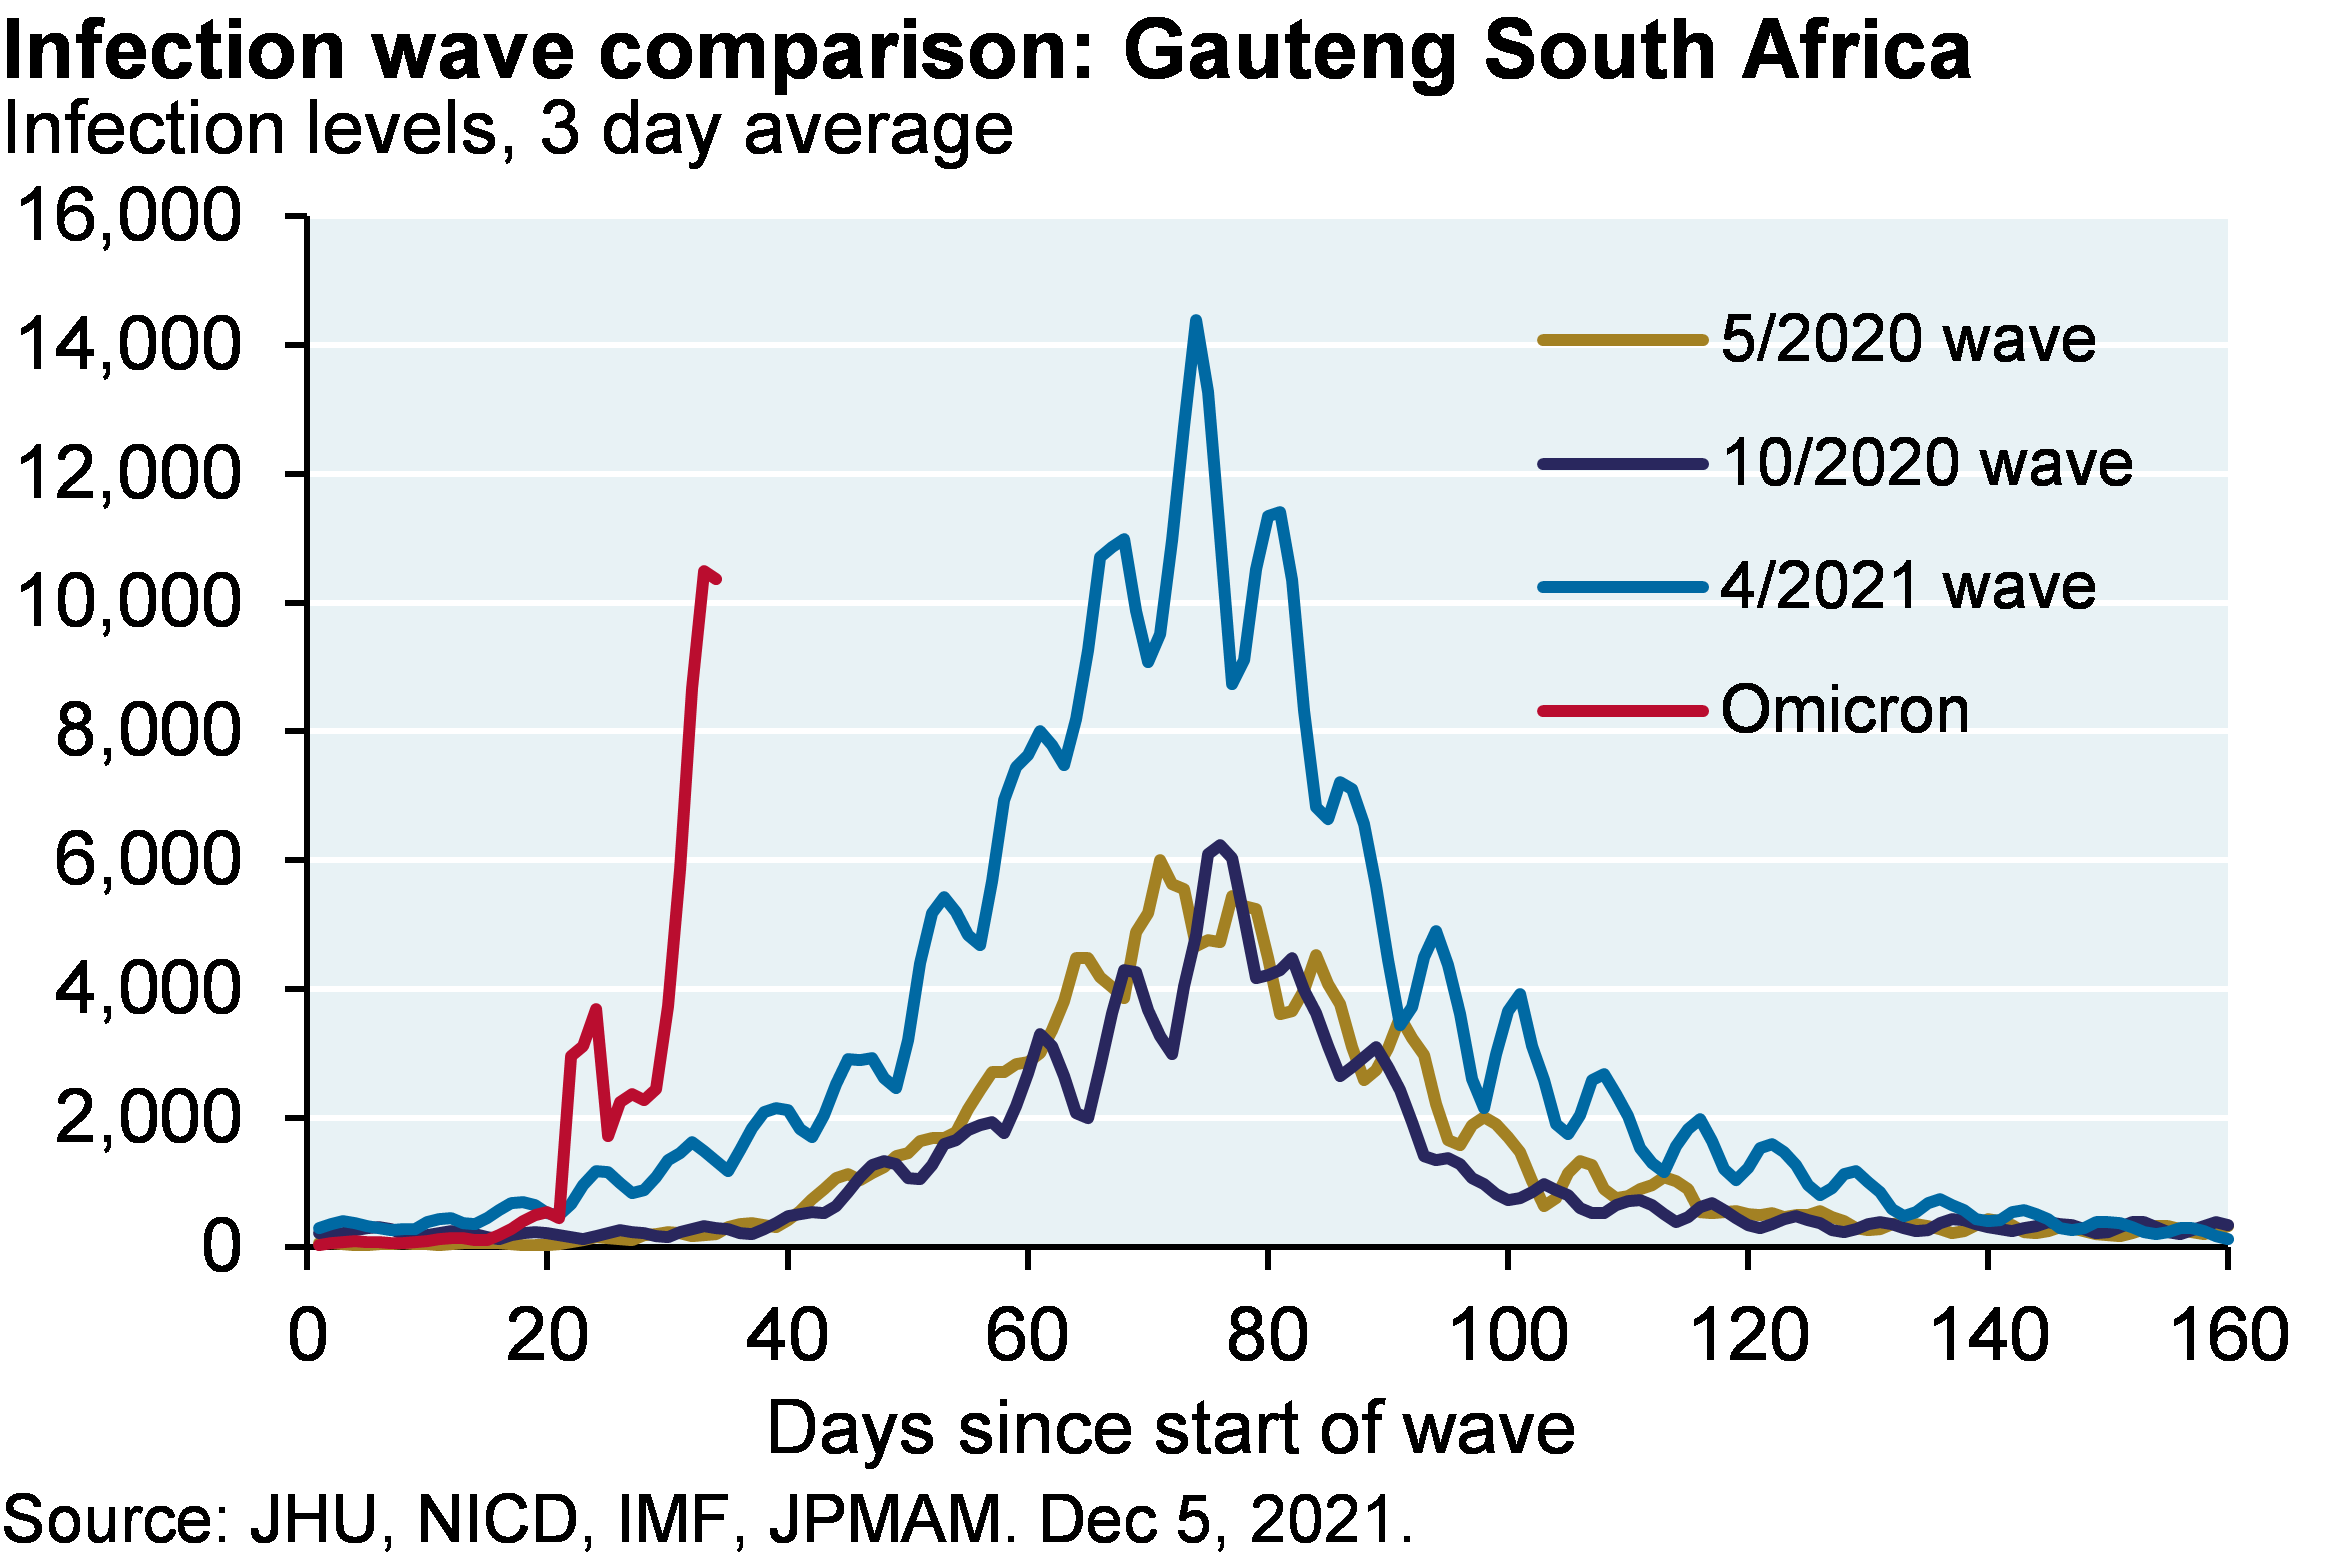 Line chart shows infection levels vs days since the start of each COVID wave in Gauteng, South Africa. Omicron appears to be much more contagious than previous waves in May 2020, October 2020, and April 2021 given infection levels are near 9,000 after only 30 days. The first two waves never reached this level, and the April 2021 wave reached 9,000 infections after about 70 days.